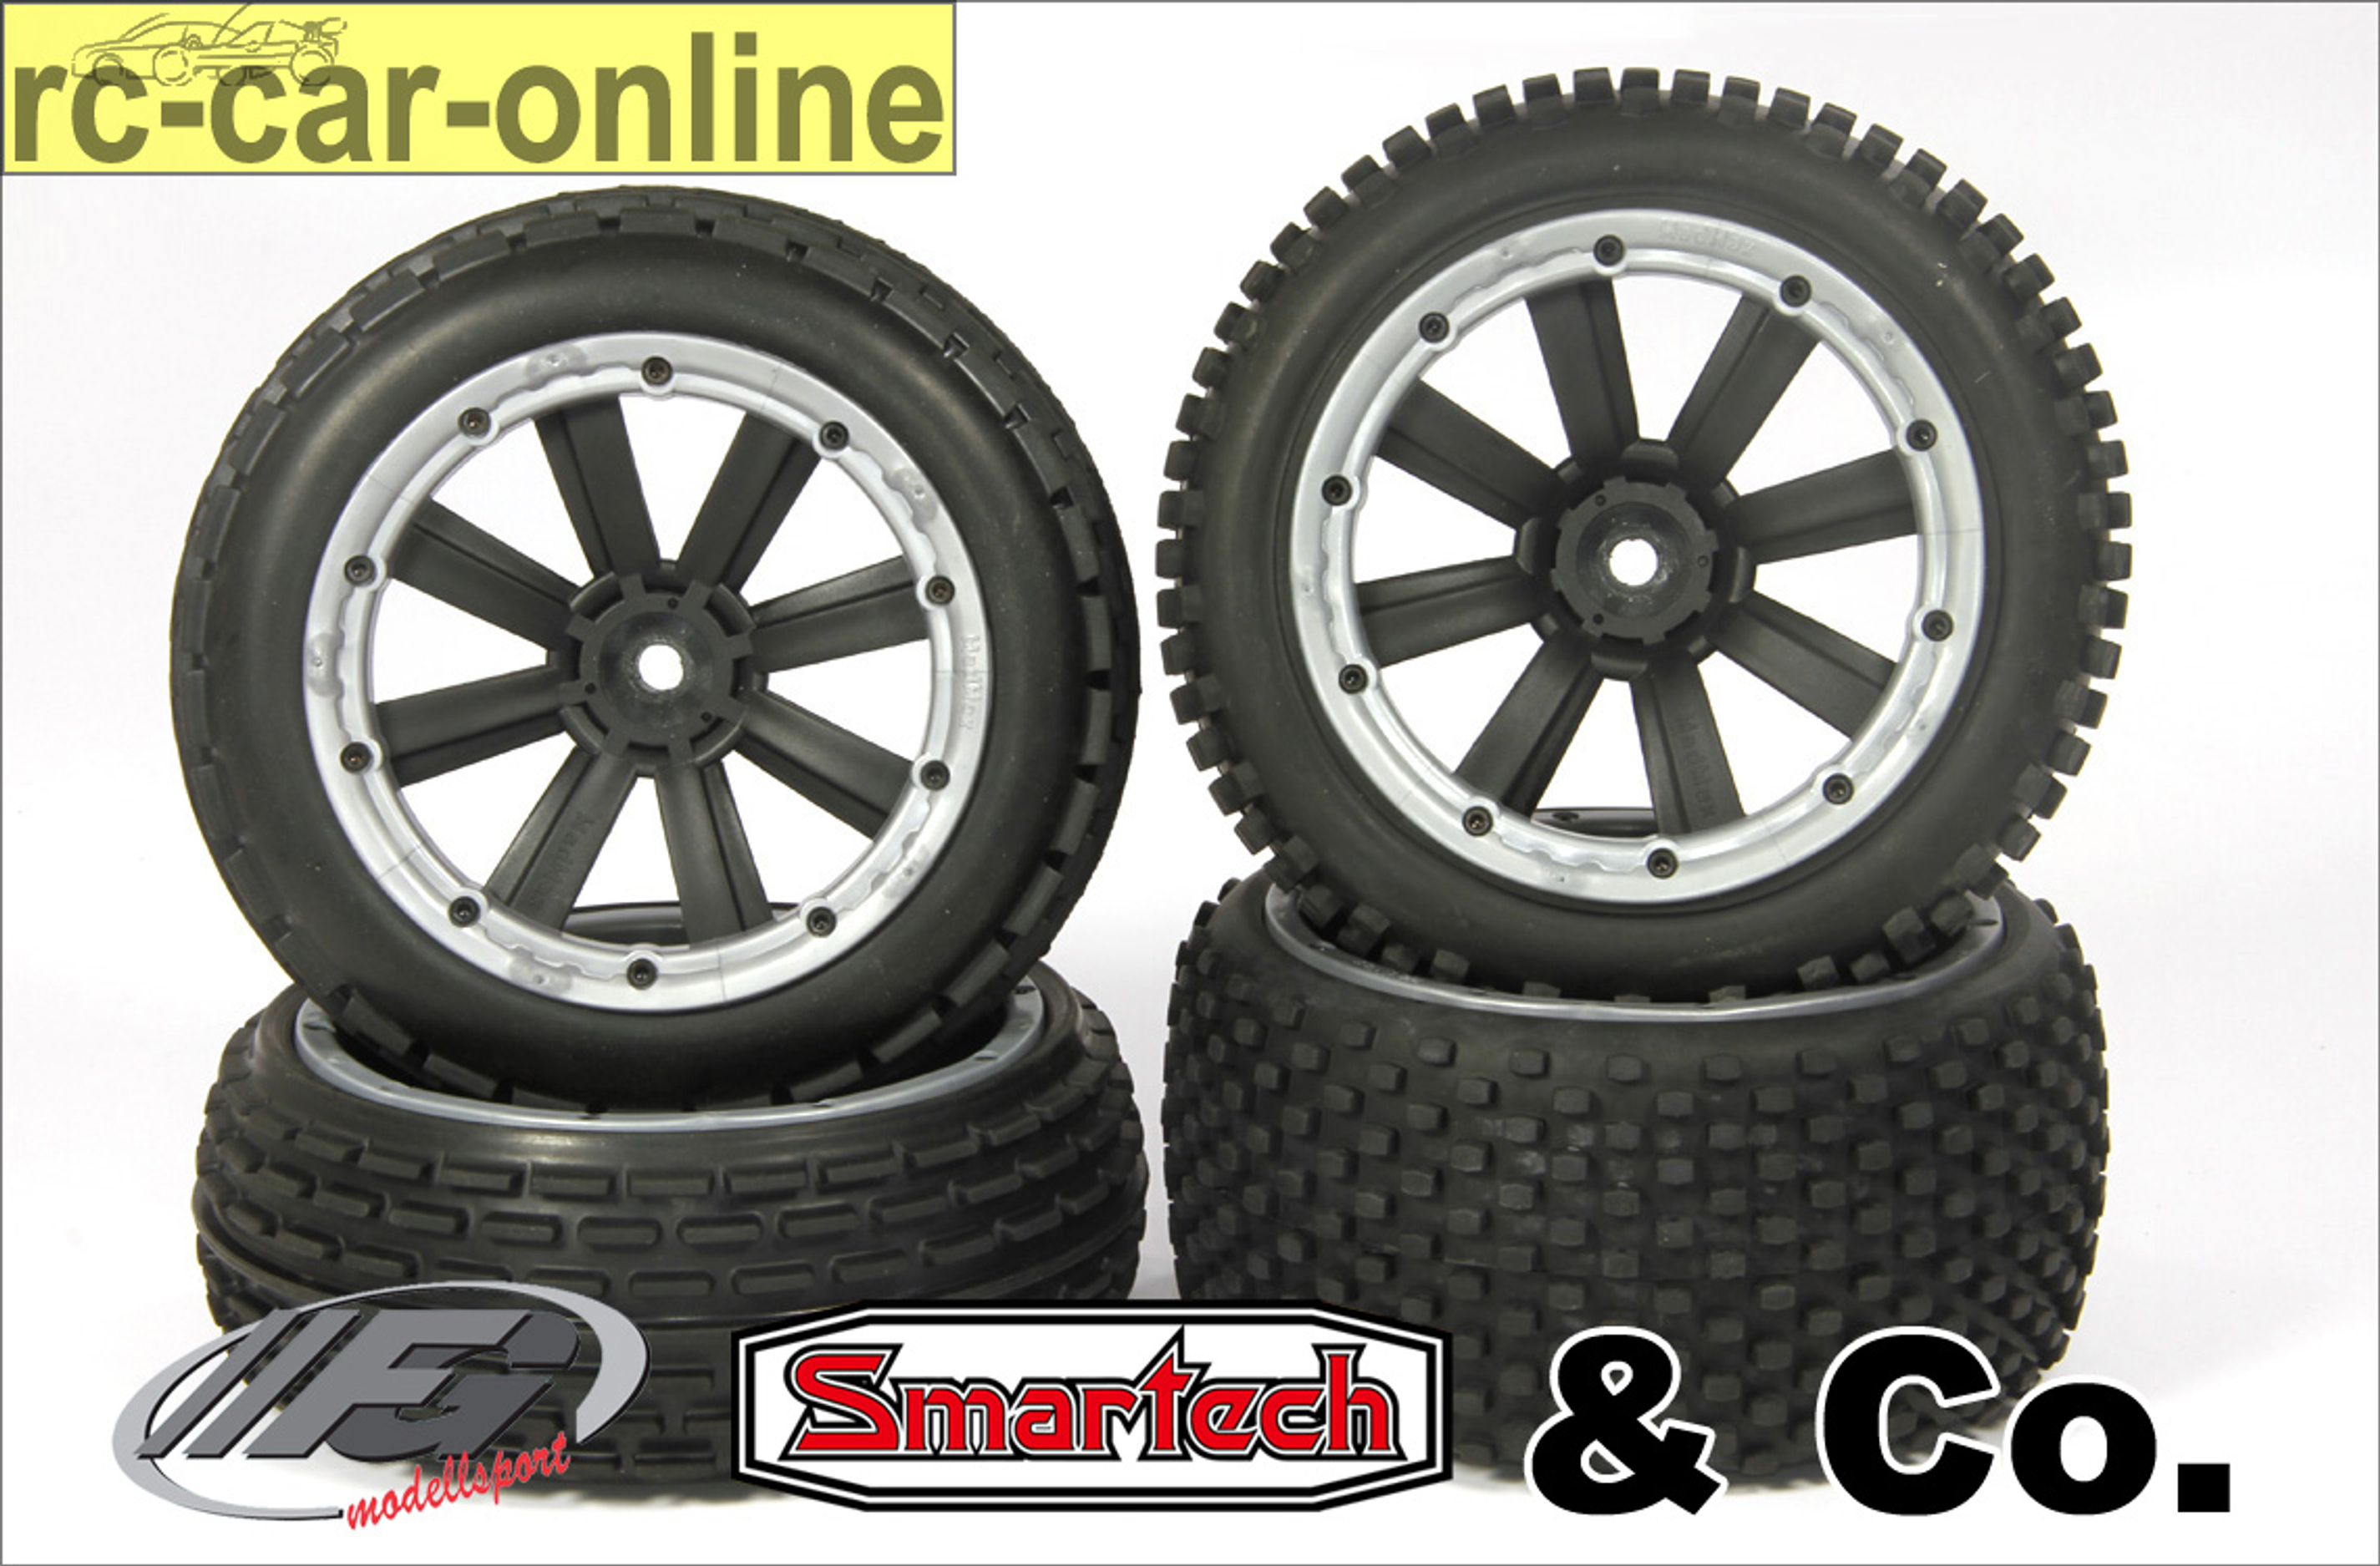 y1416/01 GPM - Ultragrip 170x80/x60 mm Wheels for FG, Smartech und Co. (18 mm square wheel drive) Offer